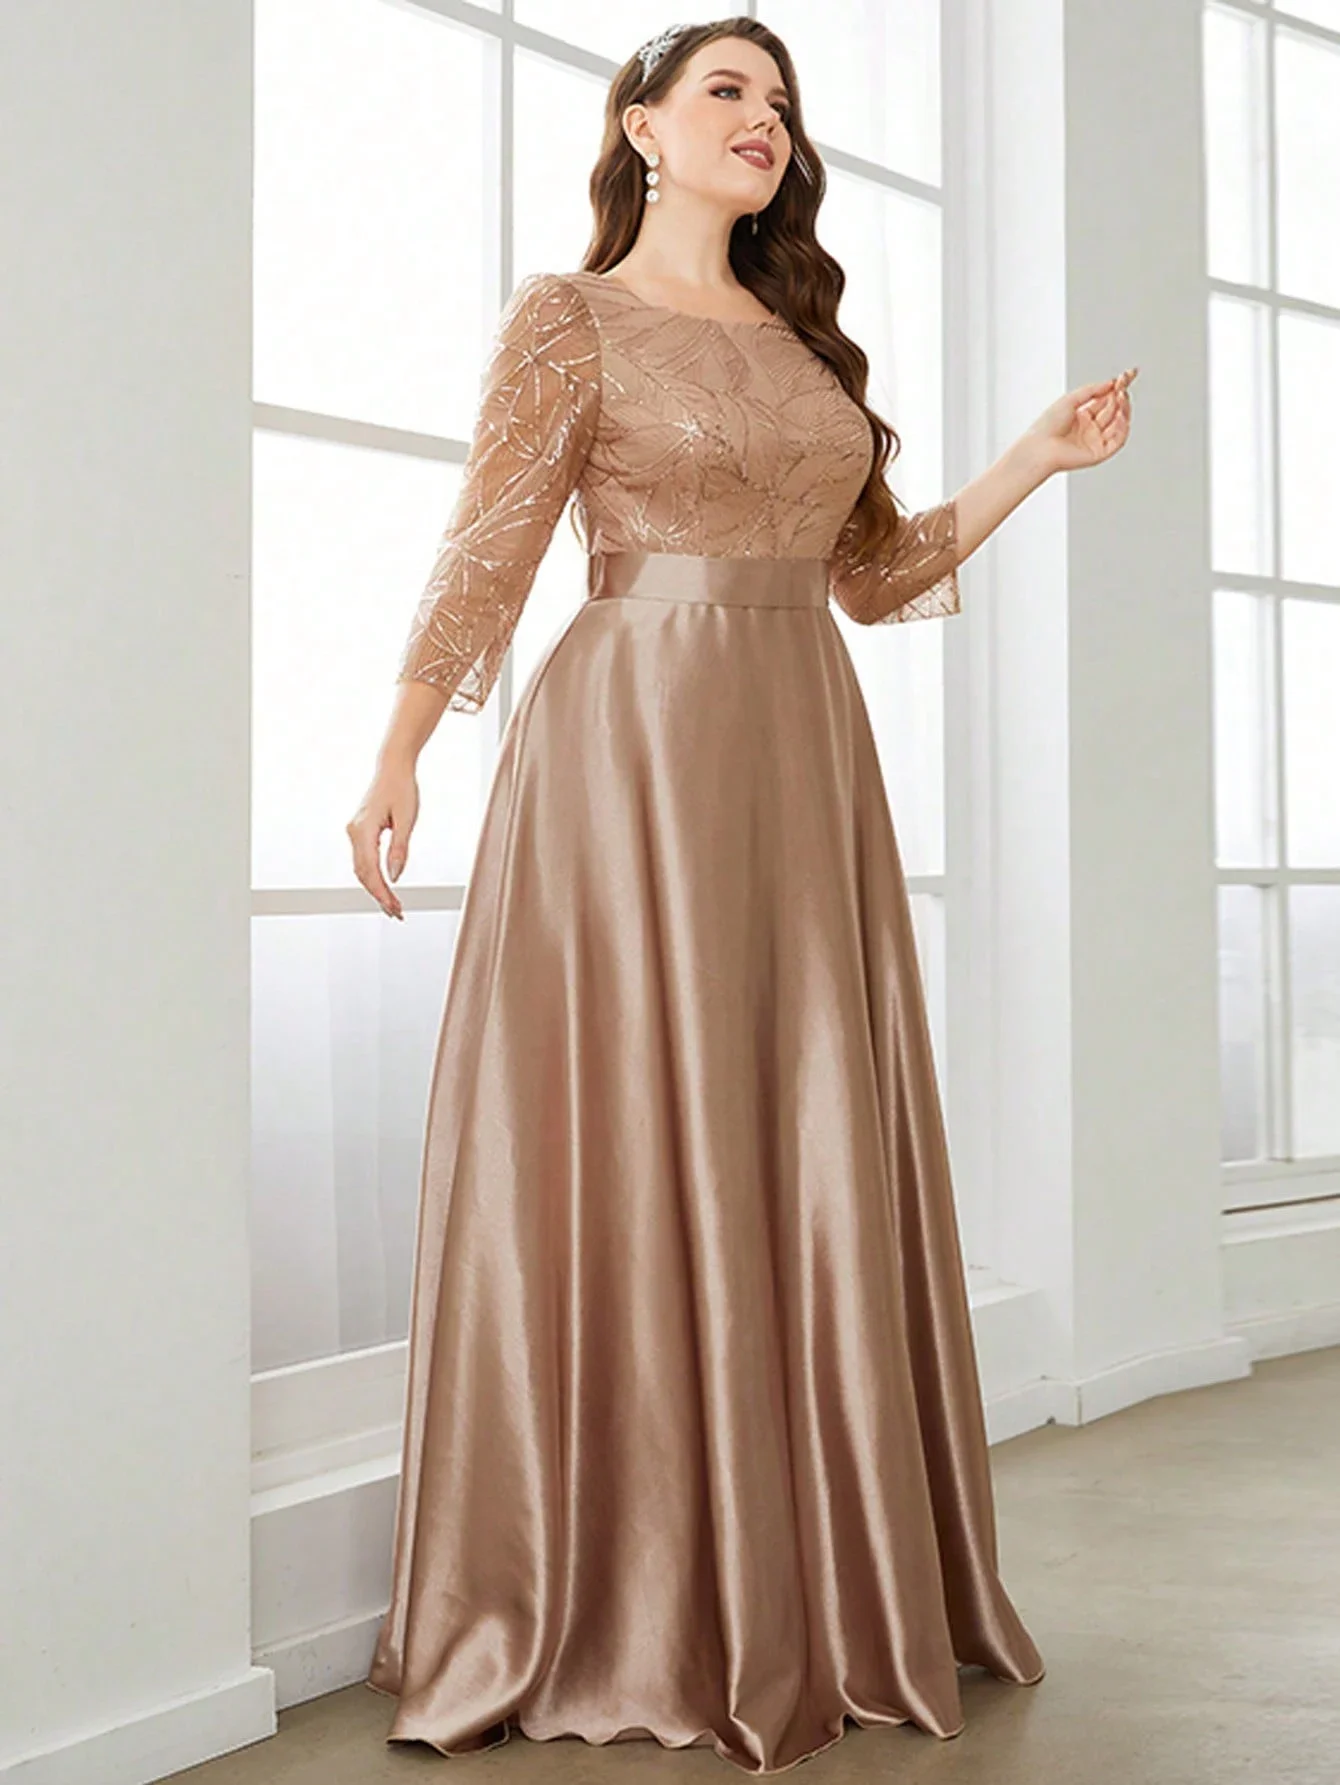 

Mgiacy Crew neck long sleeve sequin patchwork satin long gown ball dress Party dress Bridesmaid dress